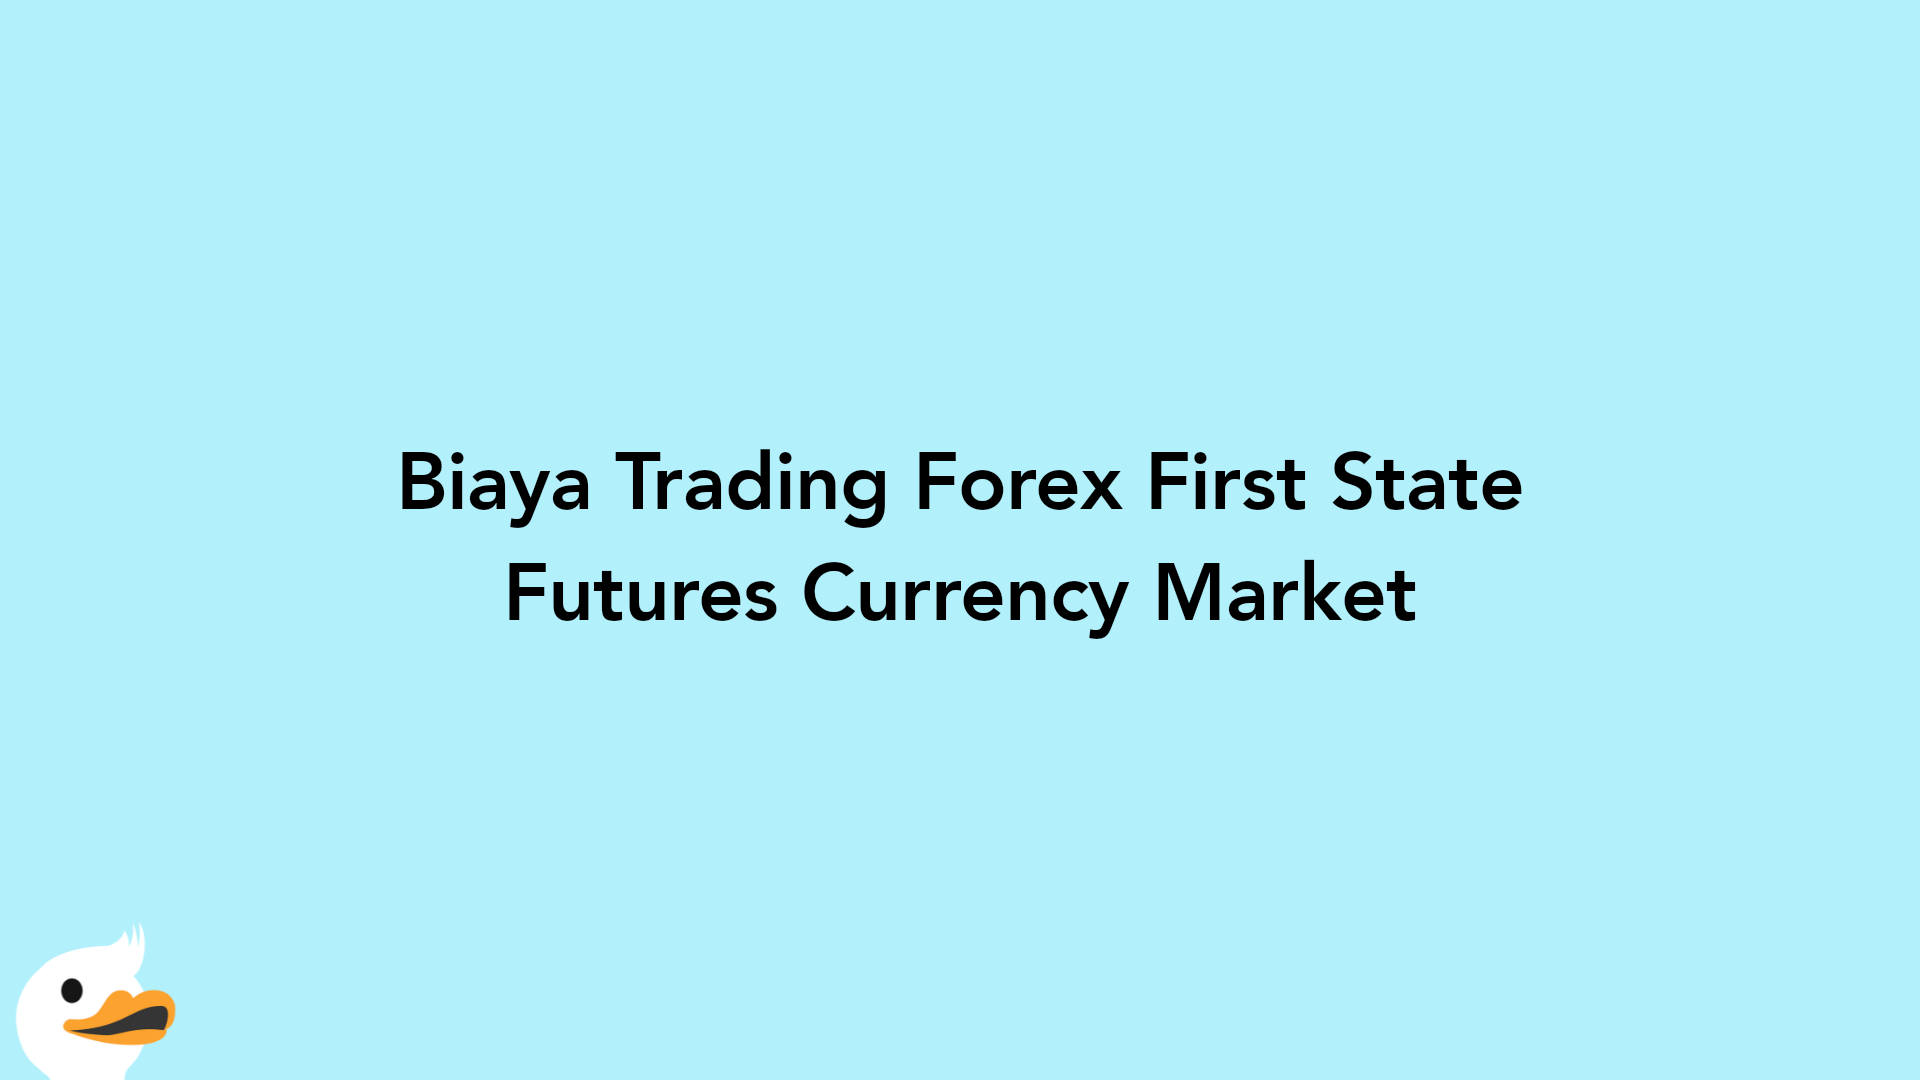 Biaya Trading Forex First State Futures Currency Market